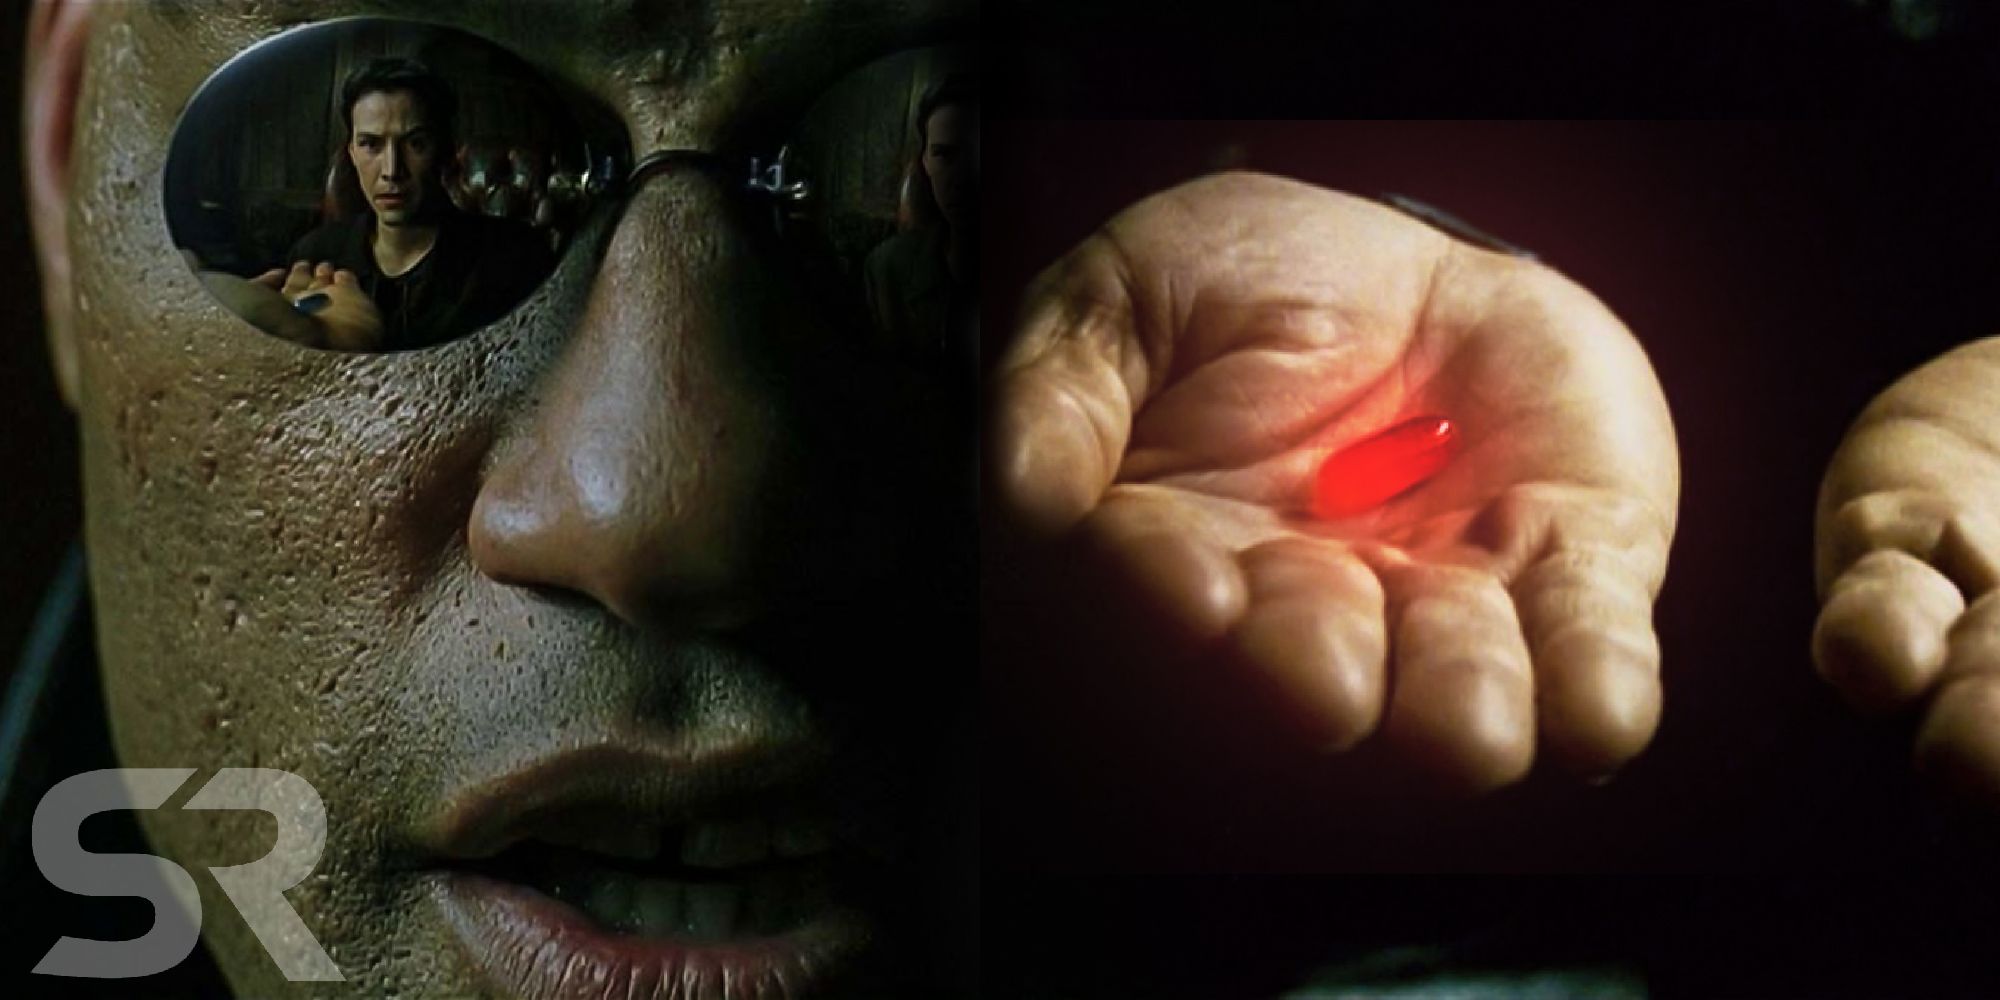 The What Taking The Red Pill Actually Does